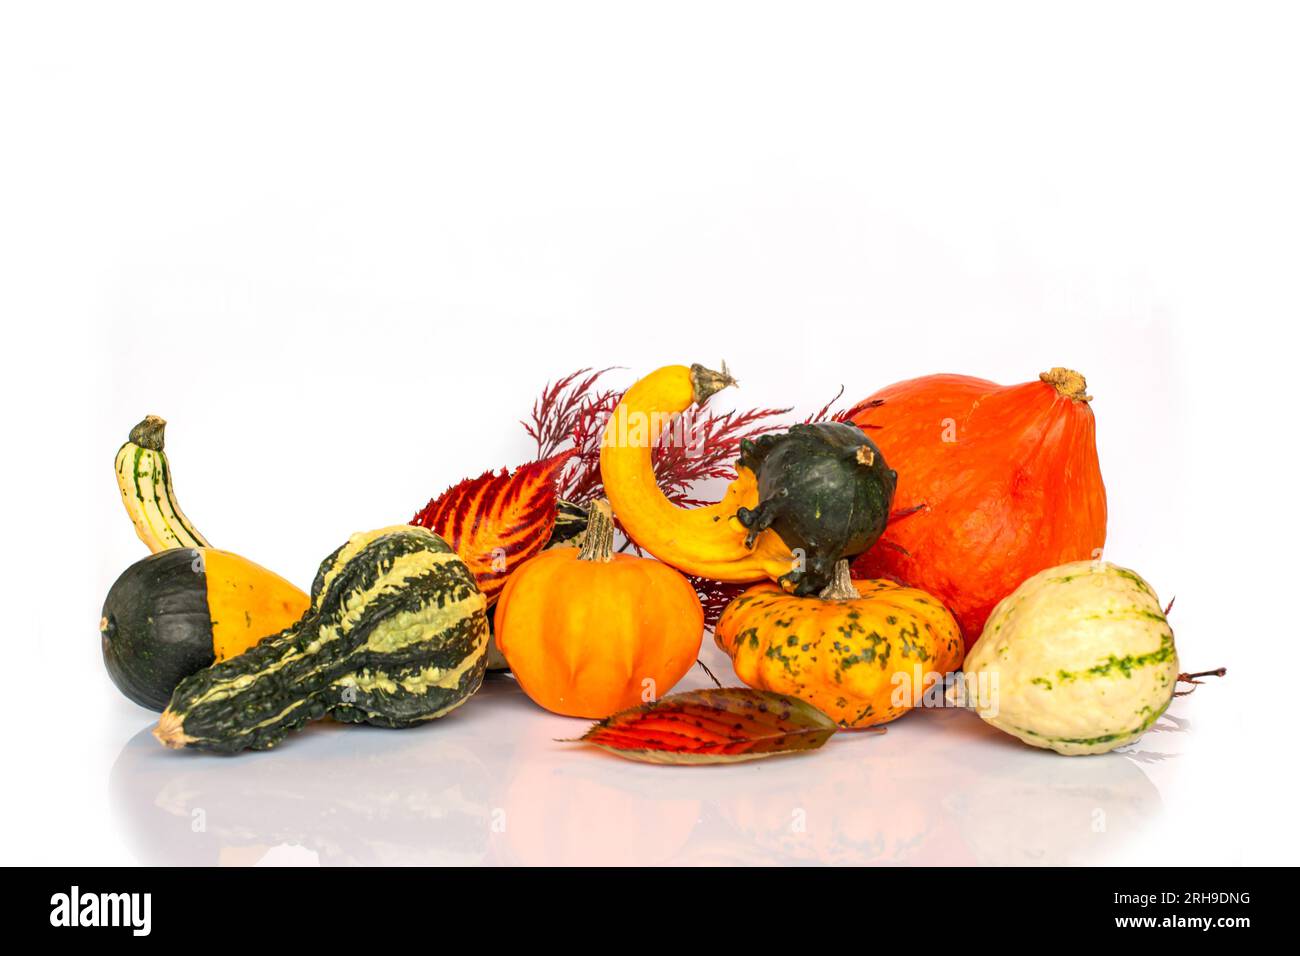 Collection of gourds on white background with copy space. Fall, halloween and Thanksgiving still life decor Stock Photo